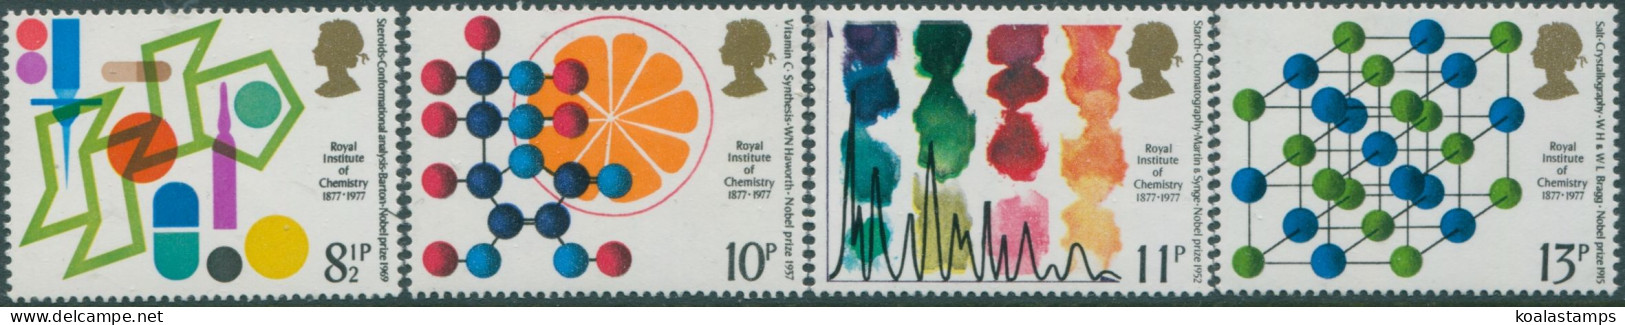 Great Britain 1977 SG1029-1032 QEII Chemistry Set MNH - Unclassified